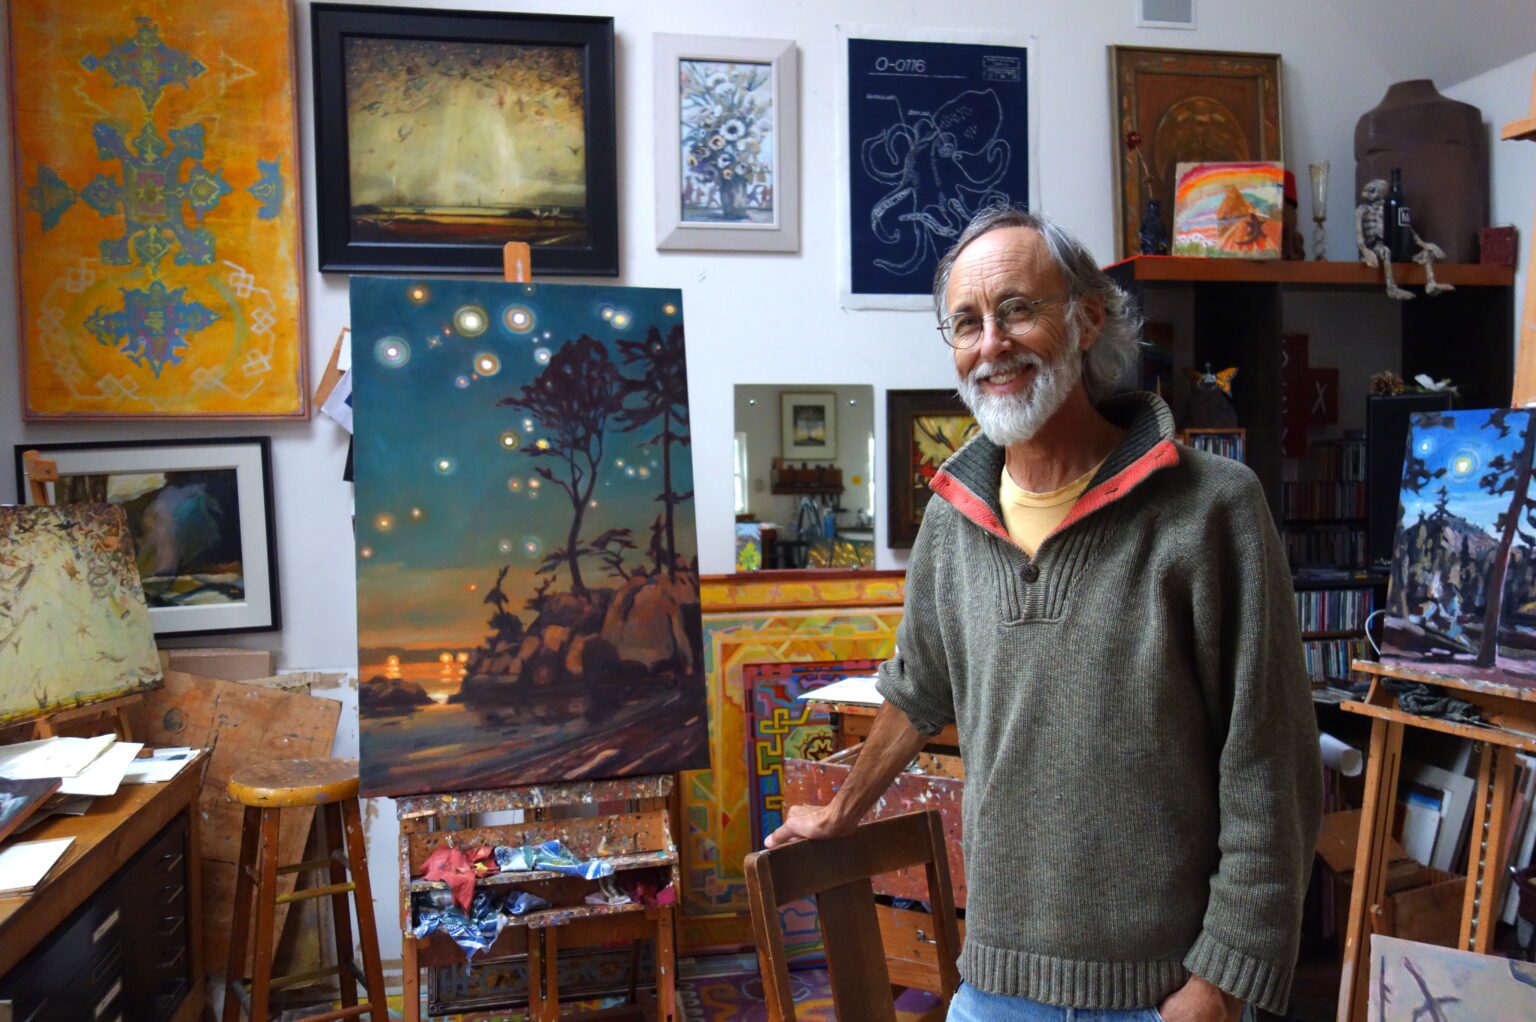 Bellingham artist Tom Wood during a tour at his Oyster Dome Studio in 2018. Most of the pictured artworks are by Wood